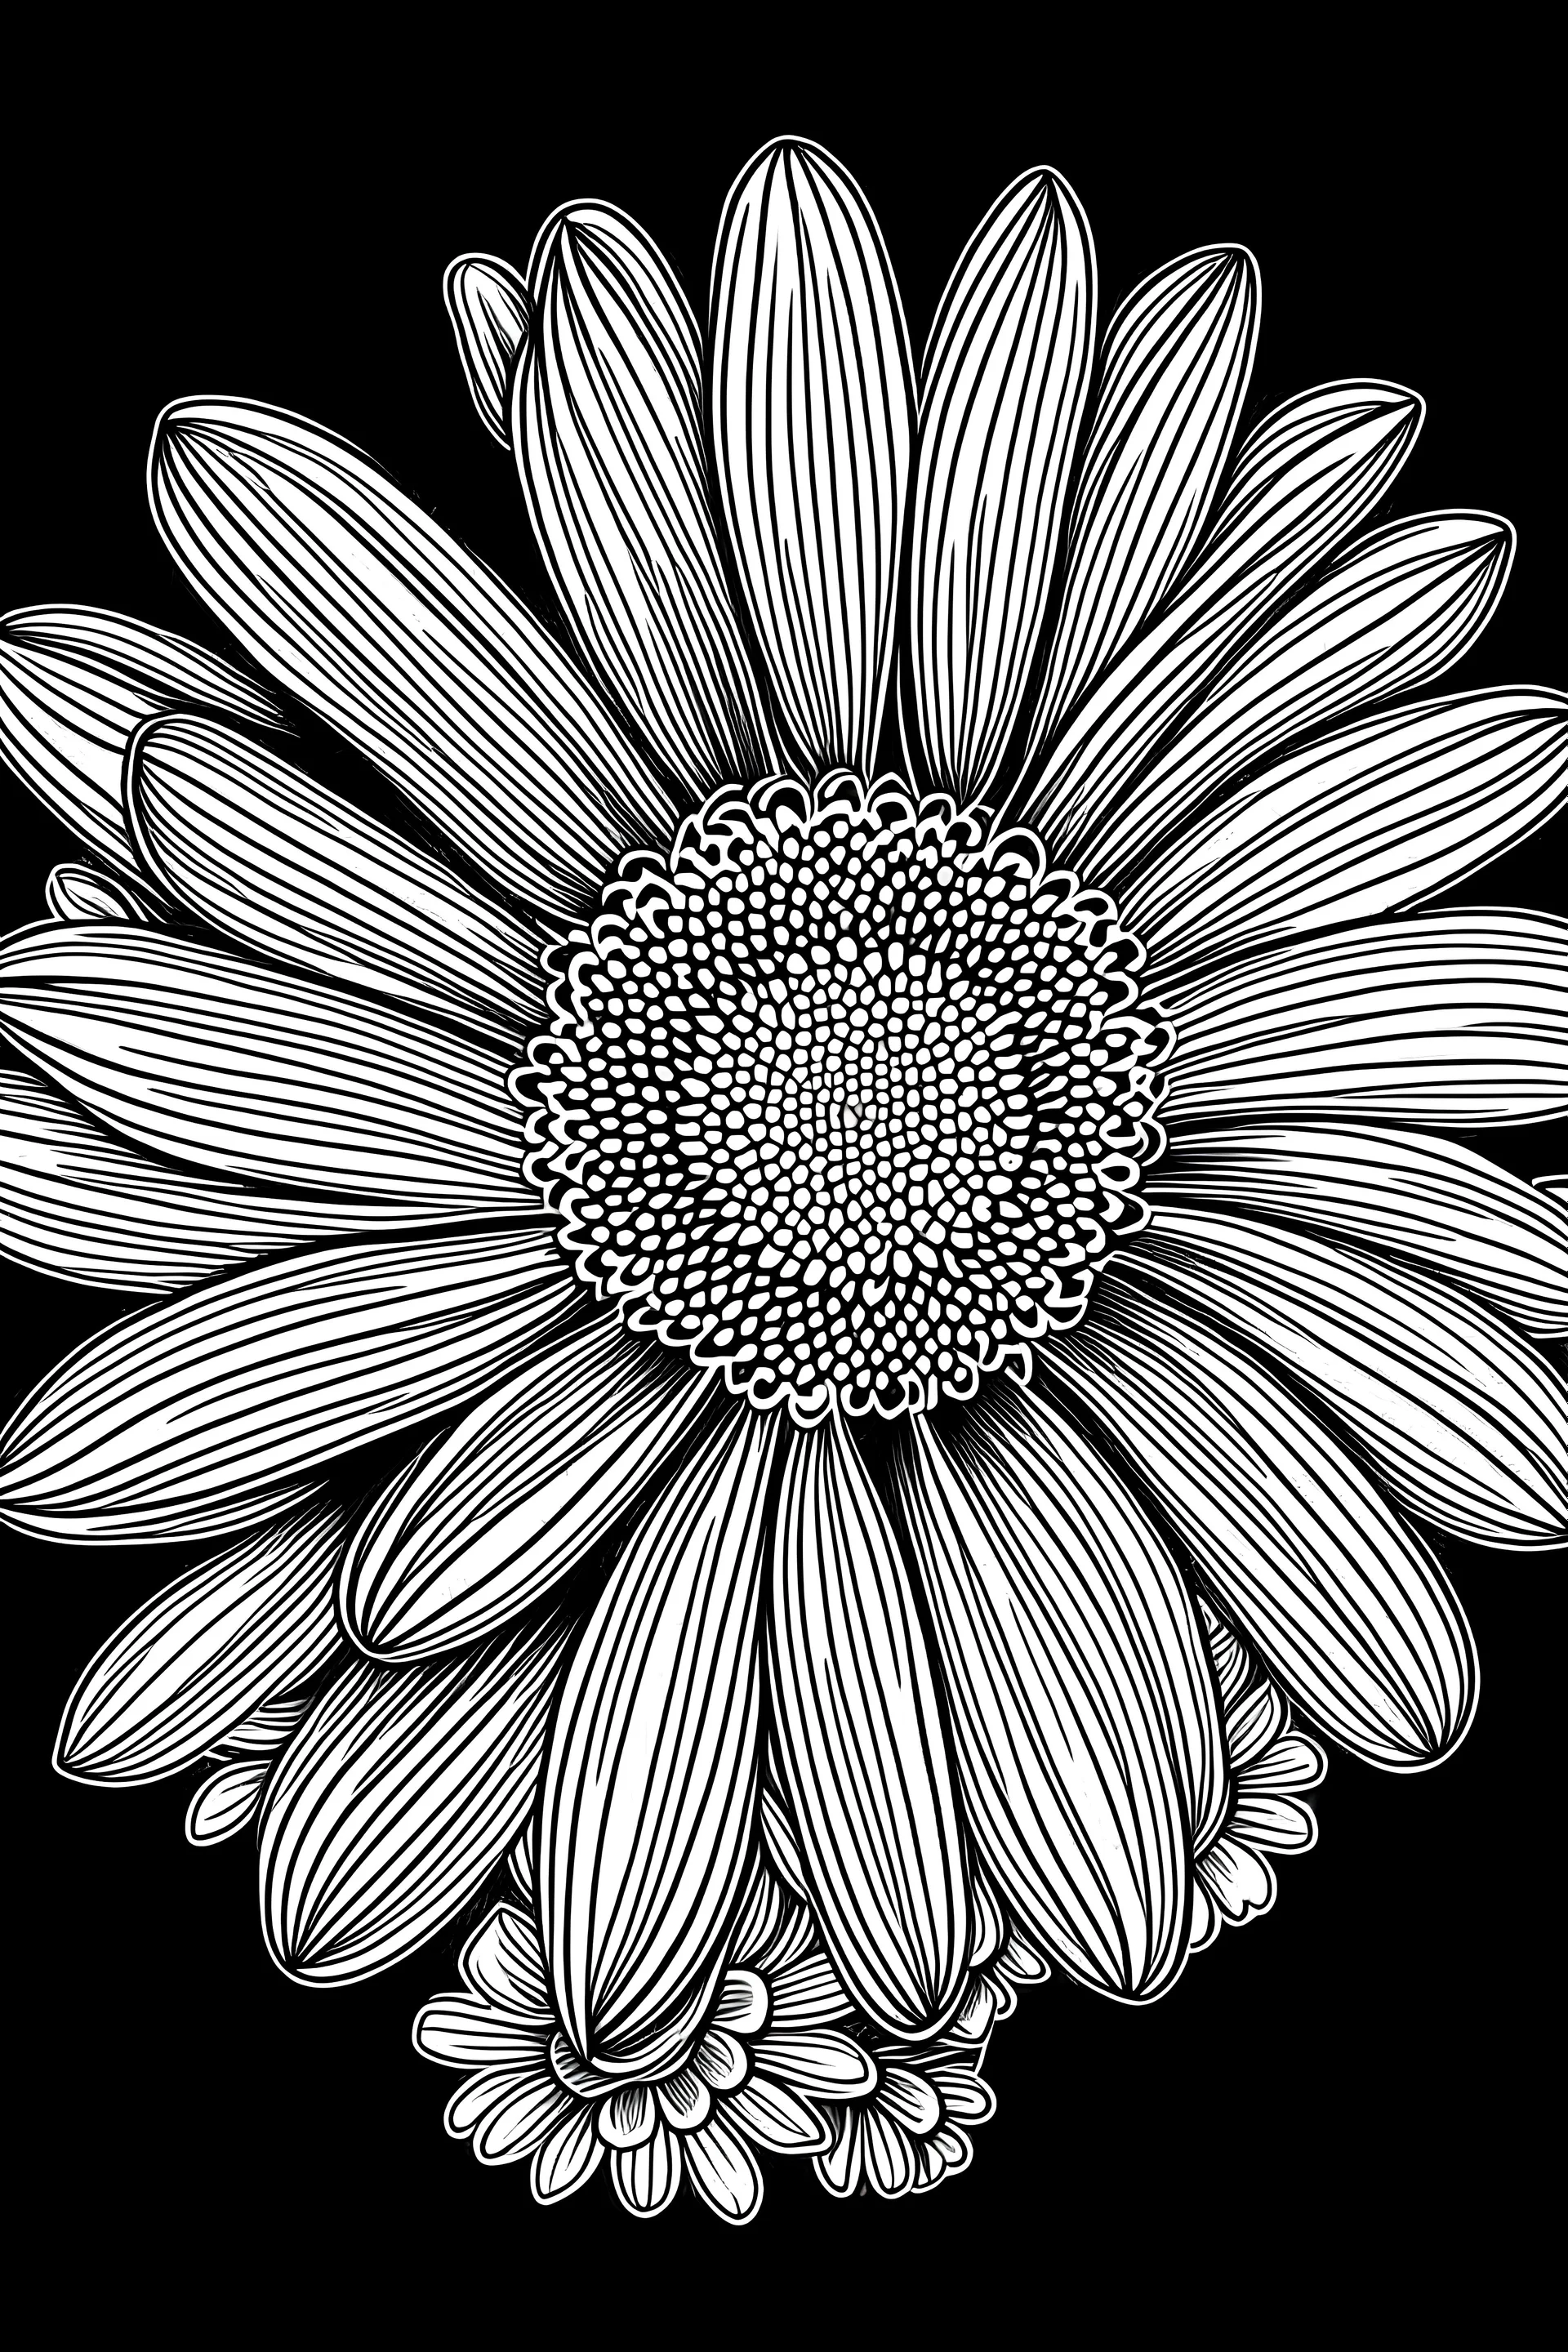 African Daisy coloring book for kids, black blackground, white and black